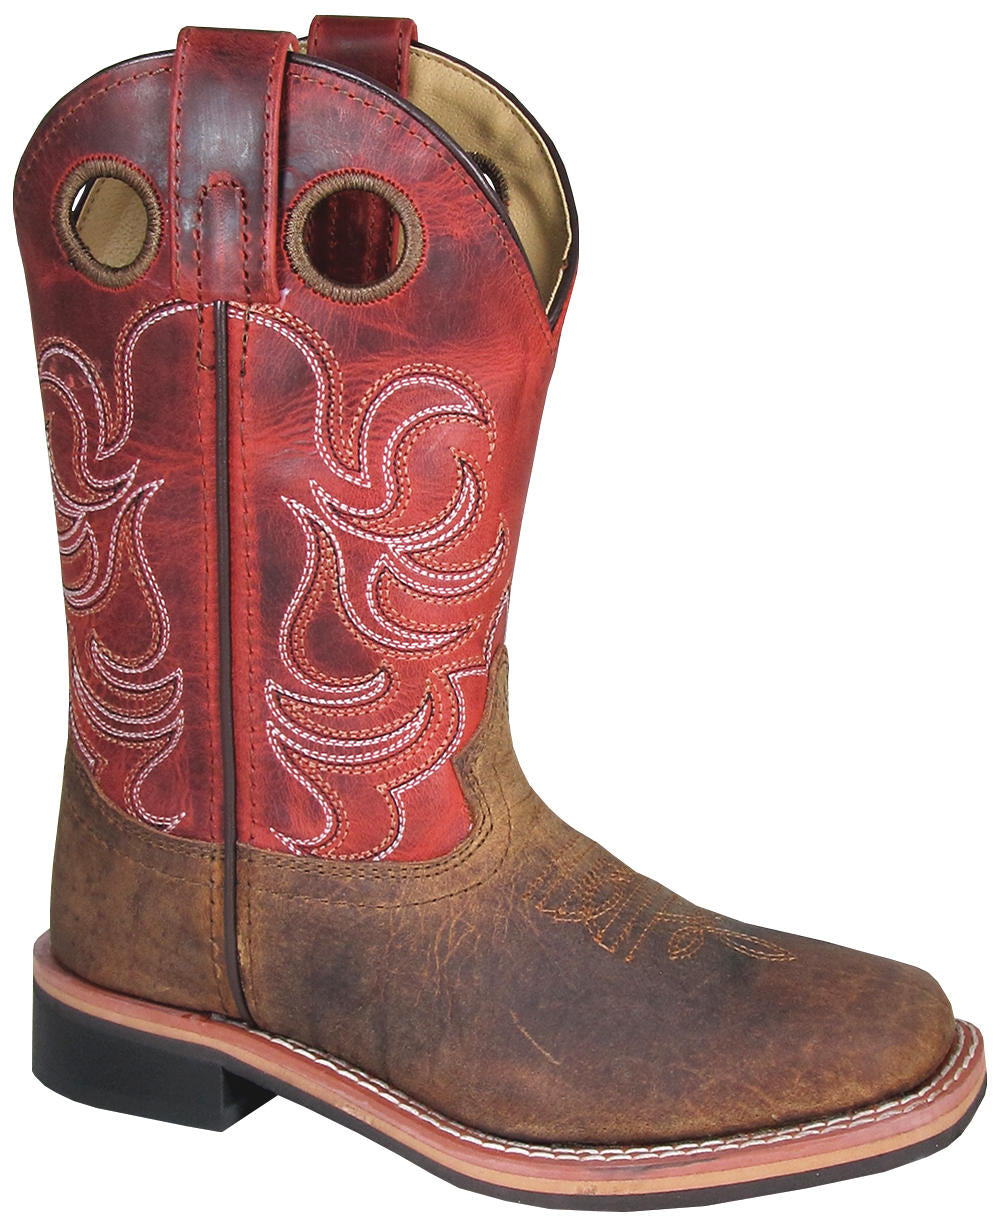 Pard's Western Shop  Smoky Mountain Boots Brown Square Toe Jesse Boots with Burnt Apple Tops for Kids